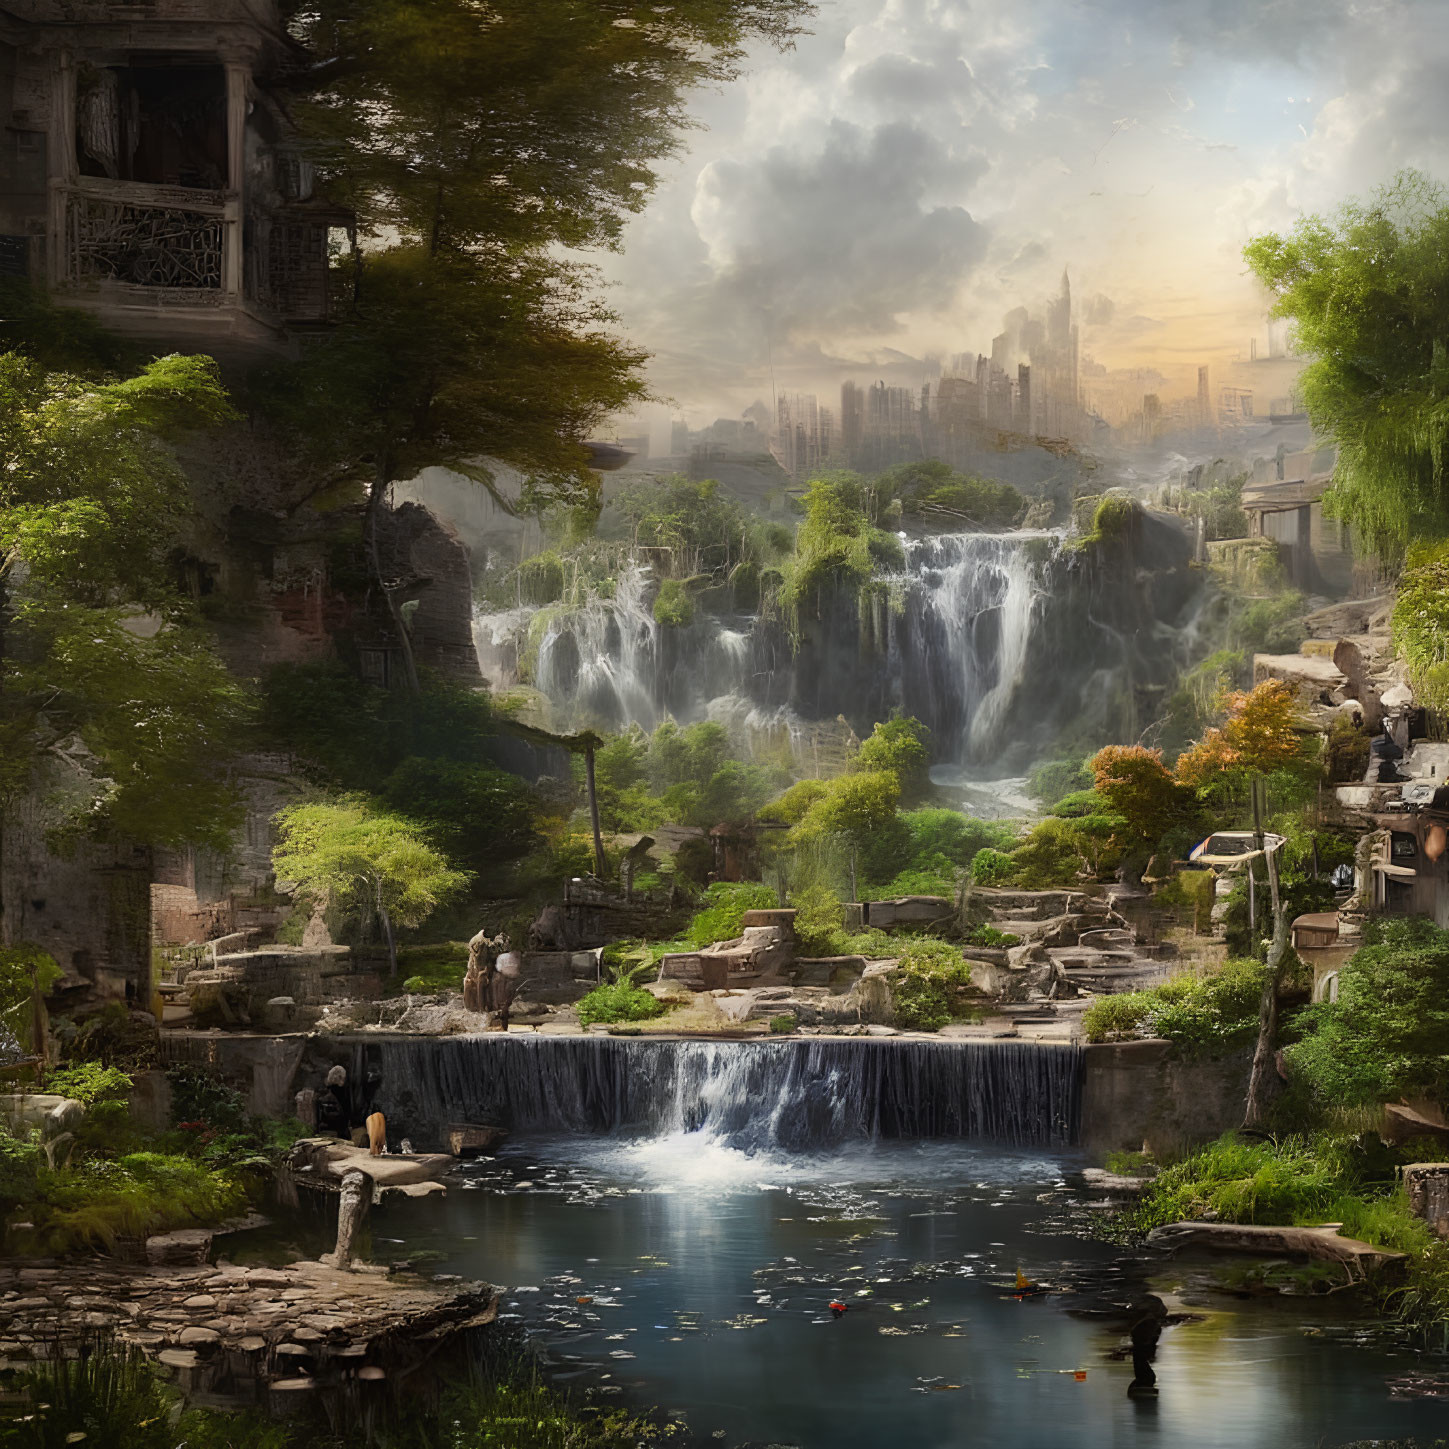 Tranquil fantasy landscape with waterfalls, river, ruins, greenery, and skyscrapers